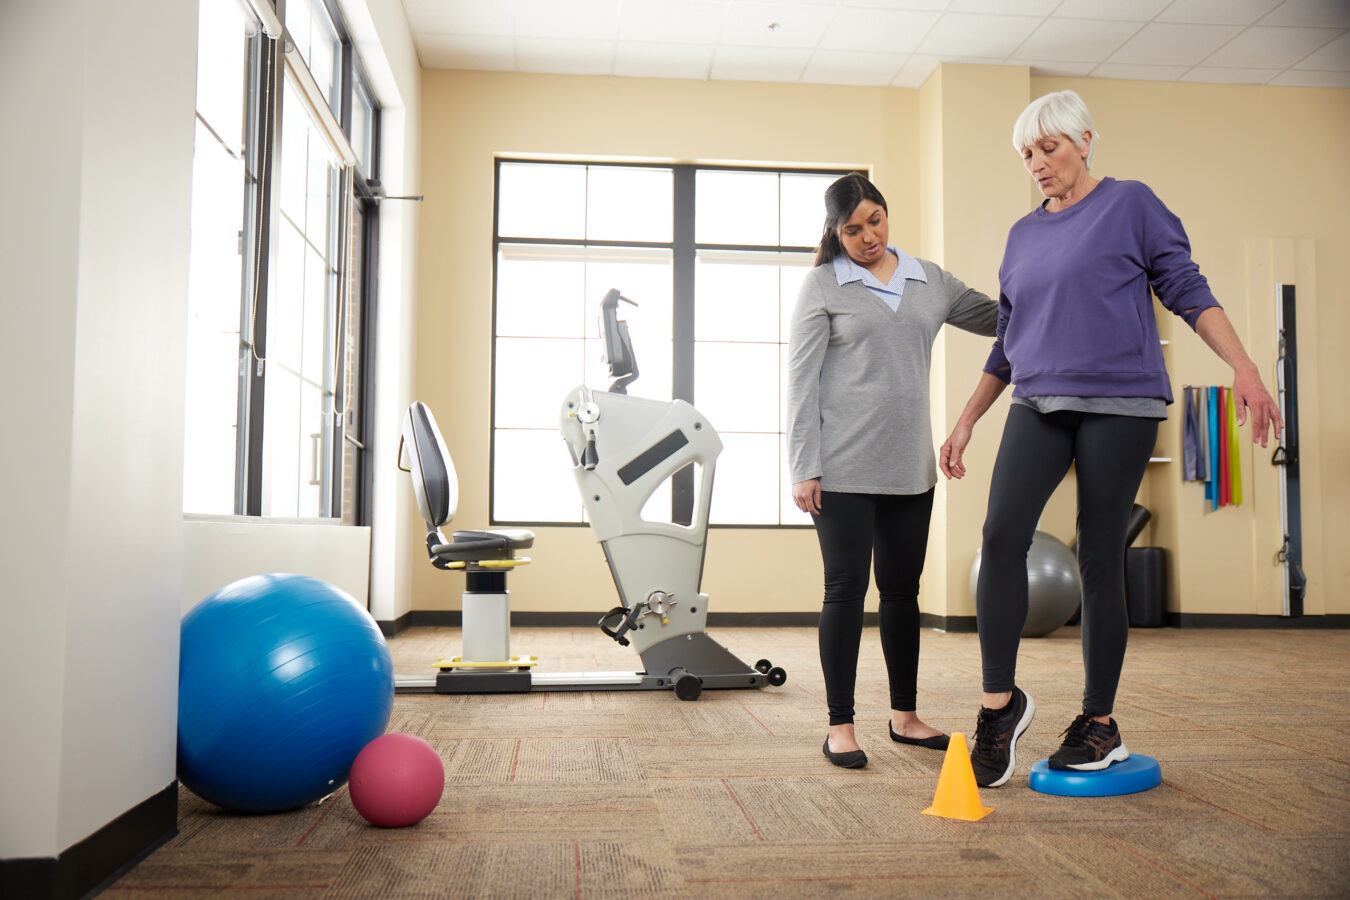 Fall prevention strategies